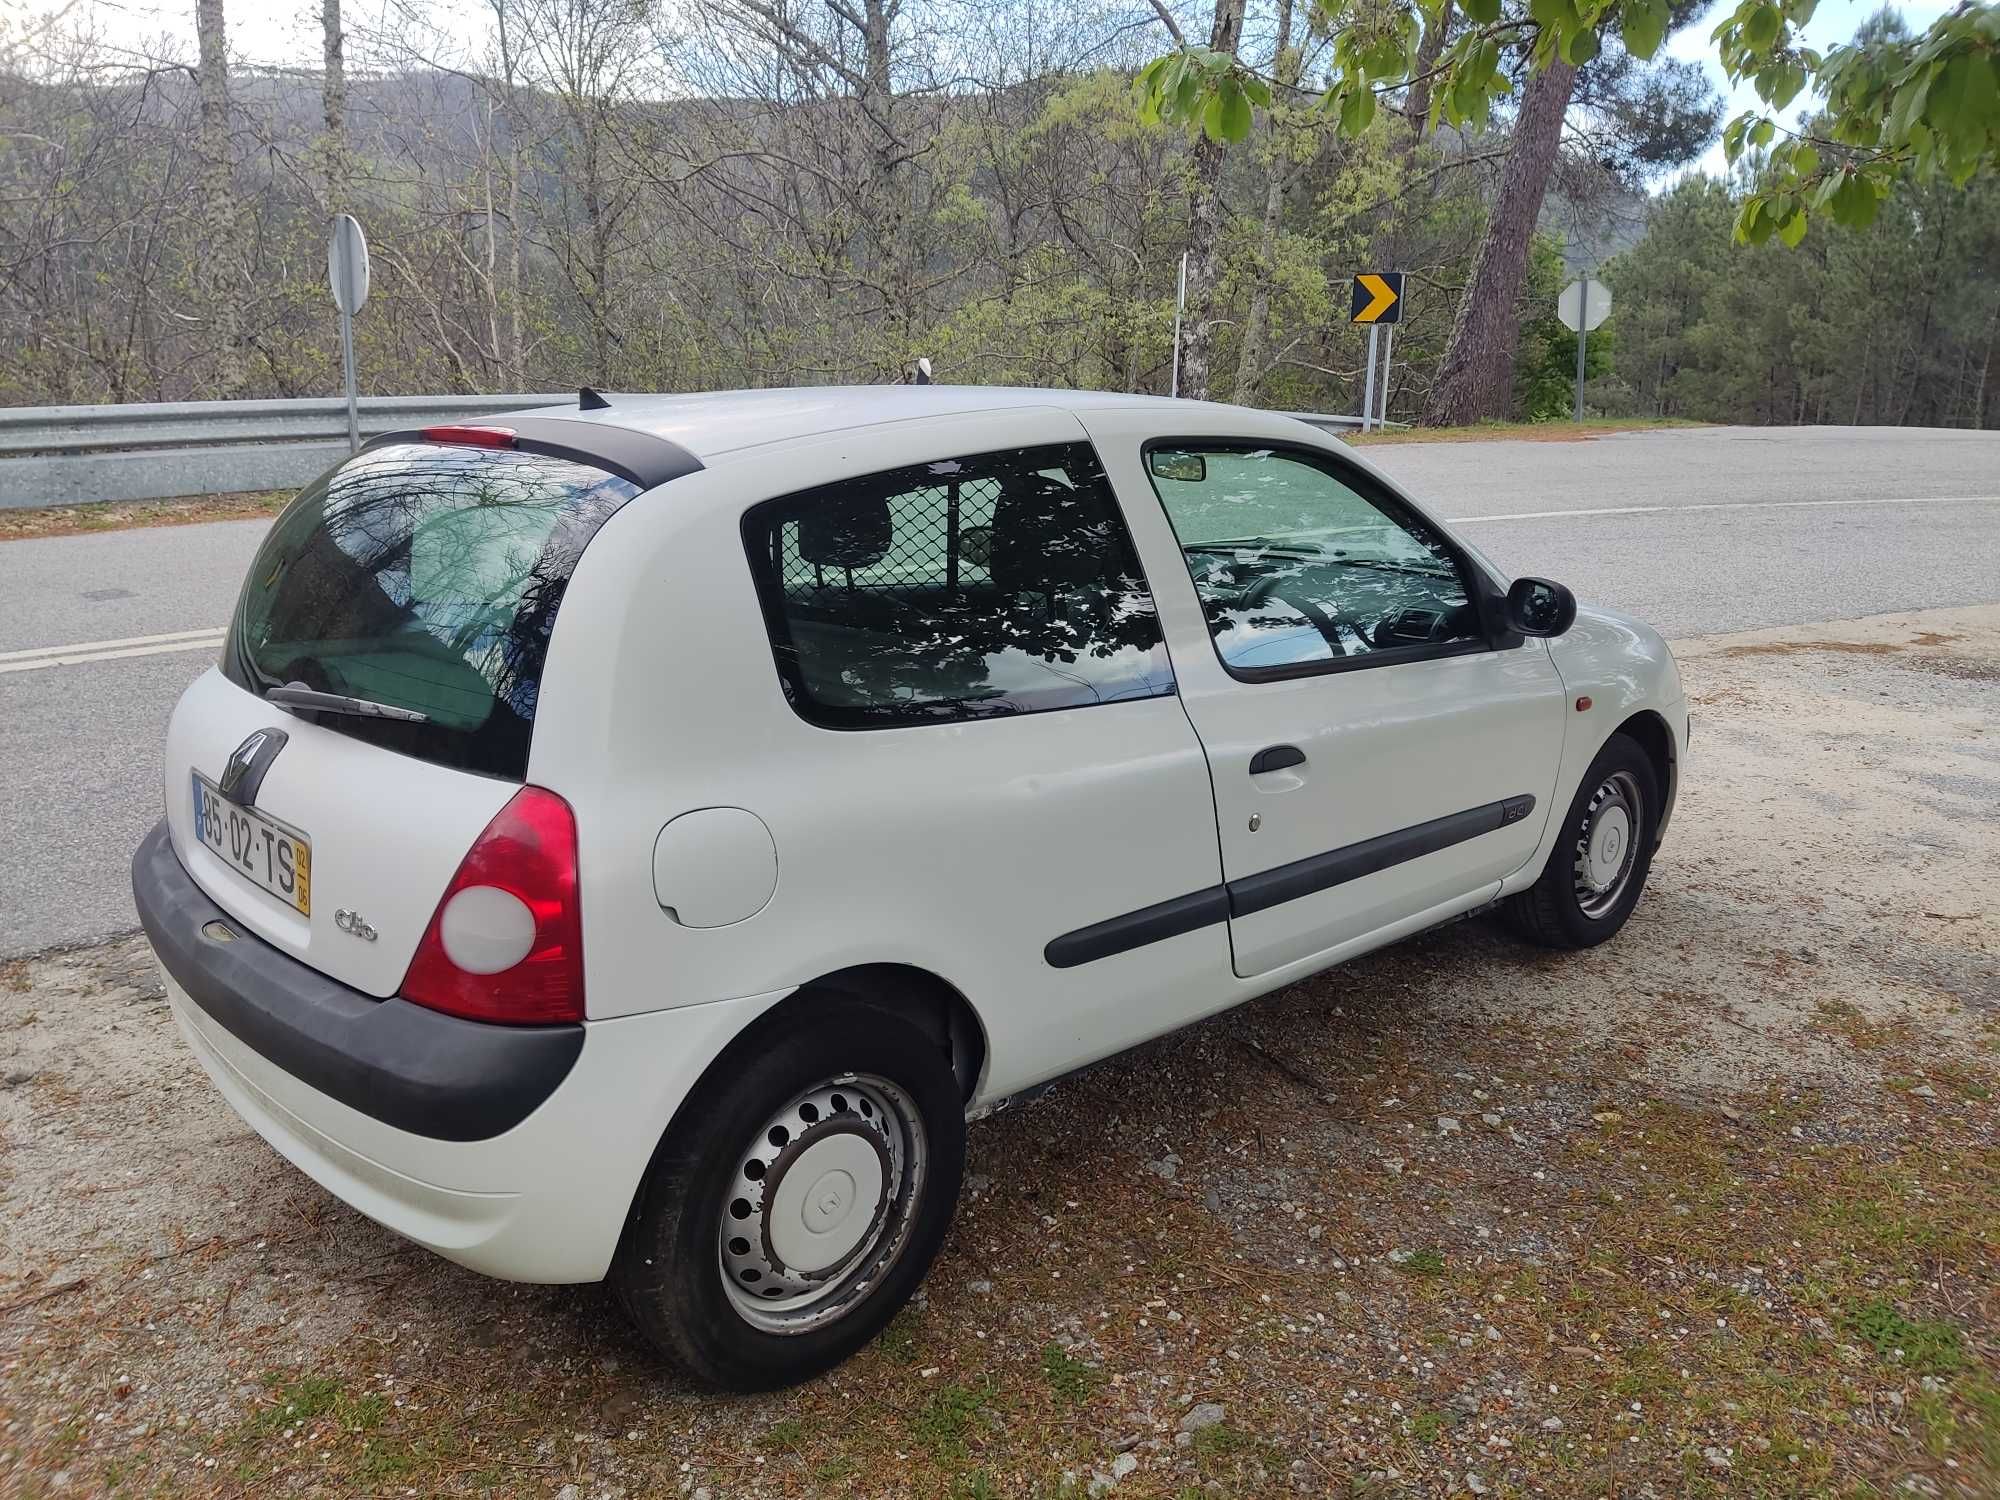 Renault Clio, 1.5dci (173 mil kms)